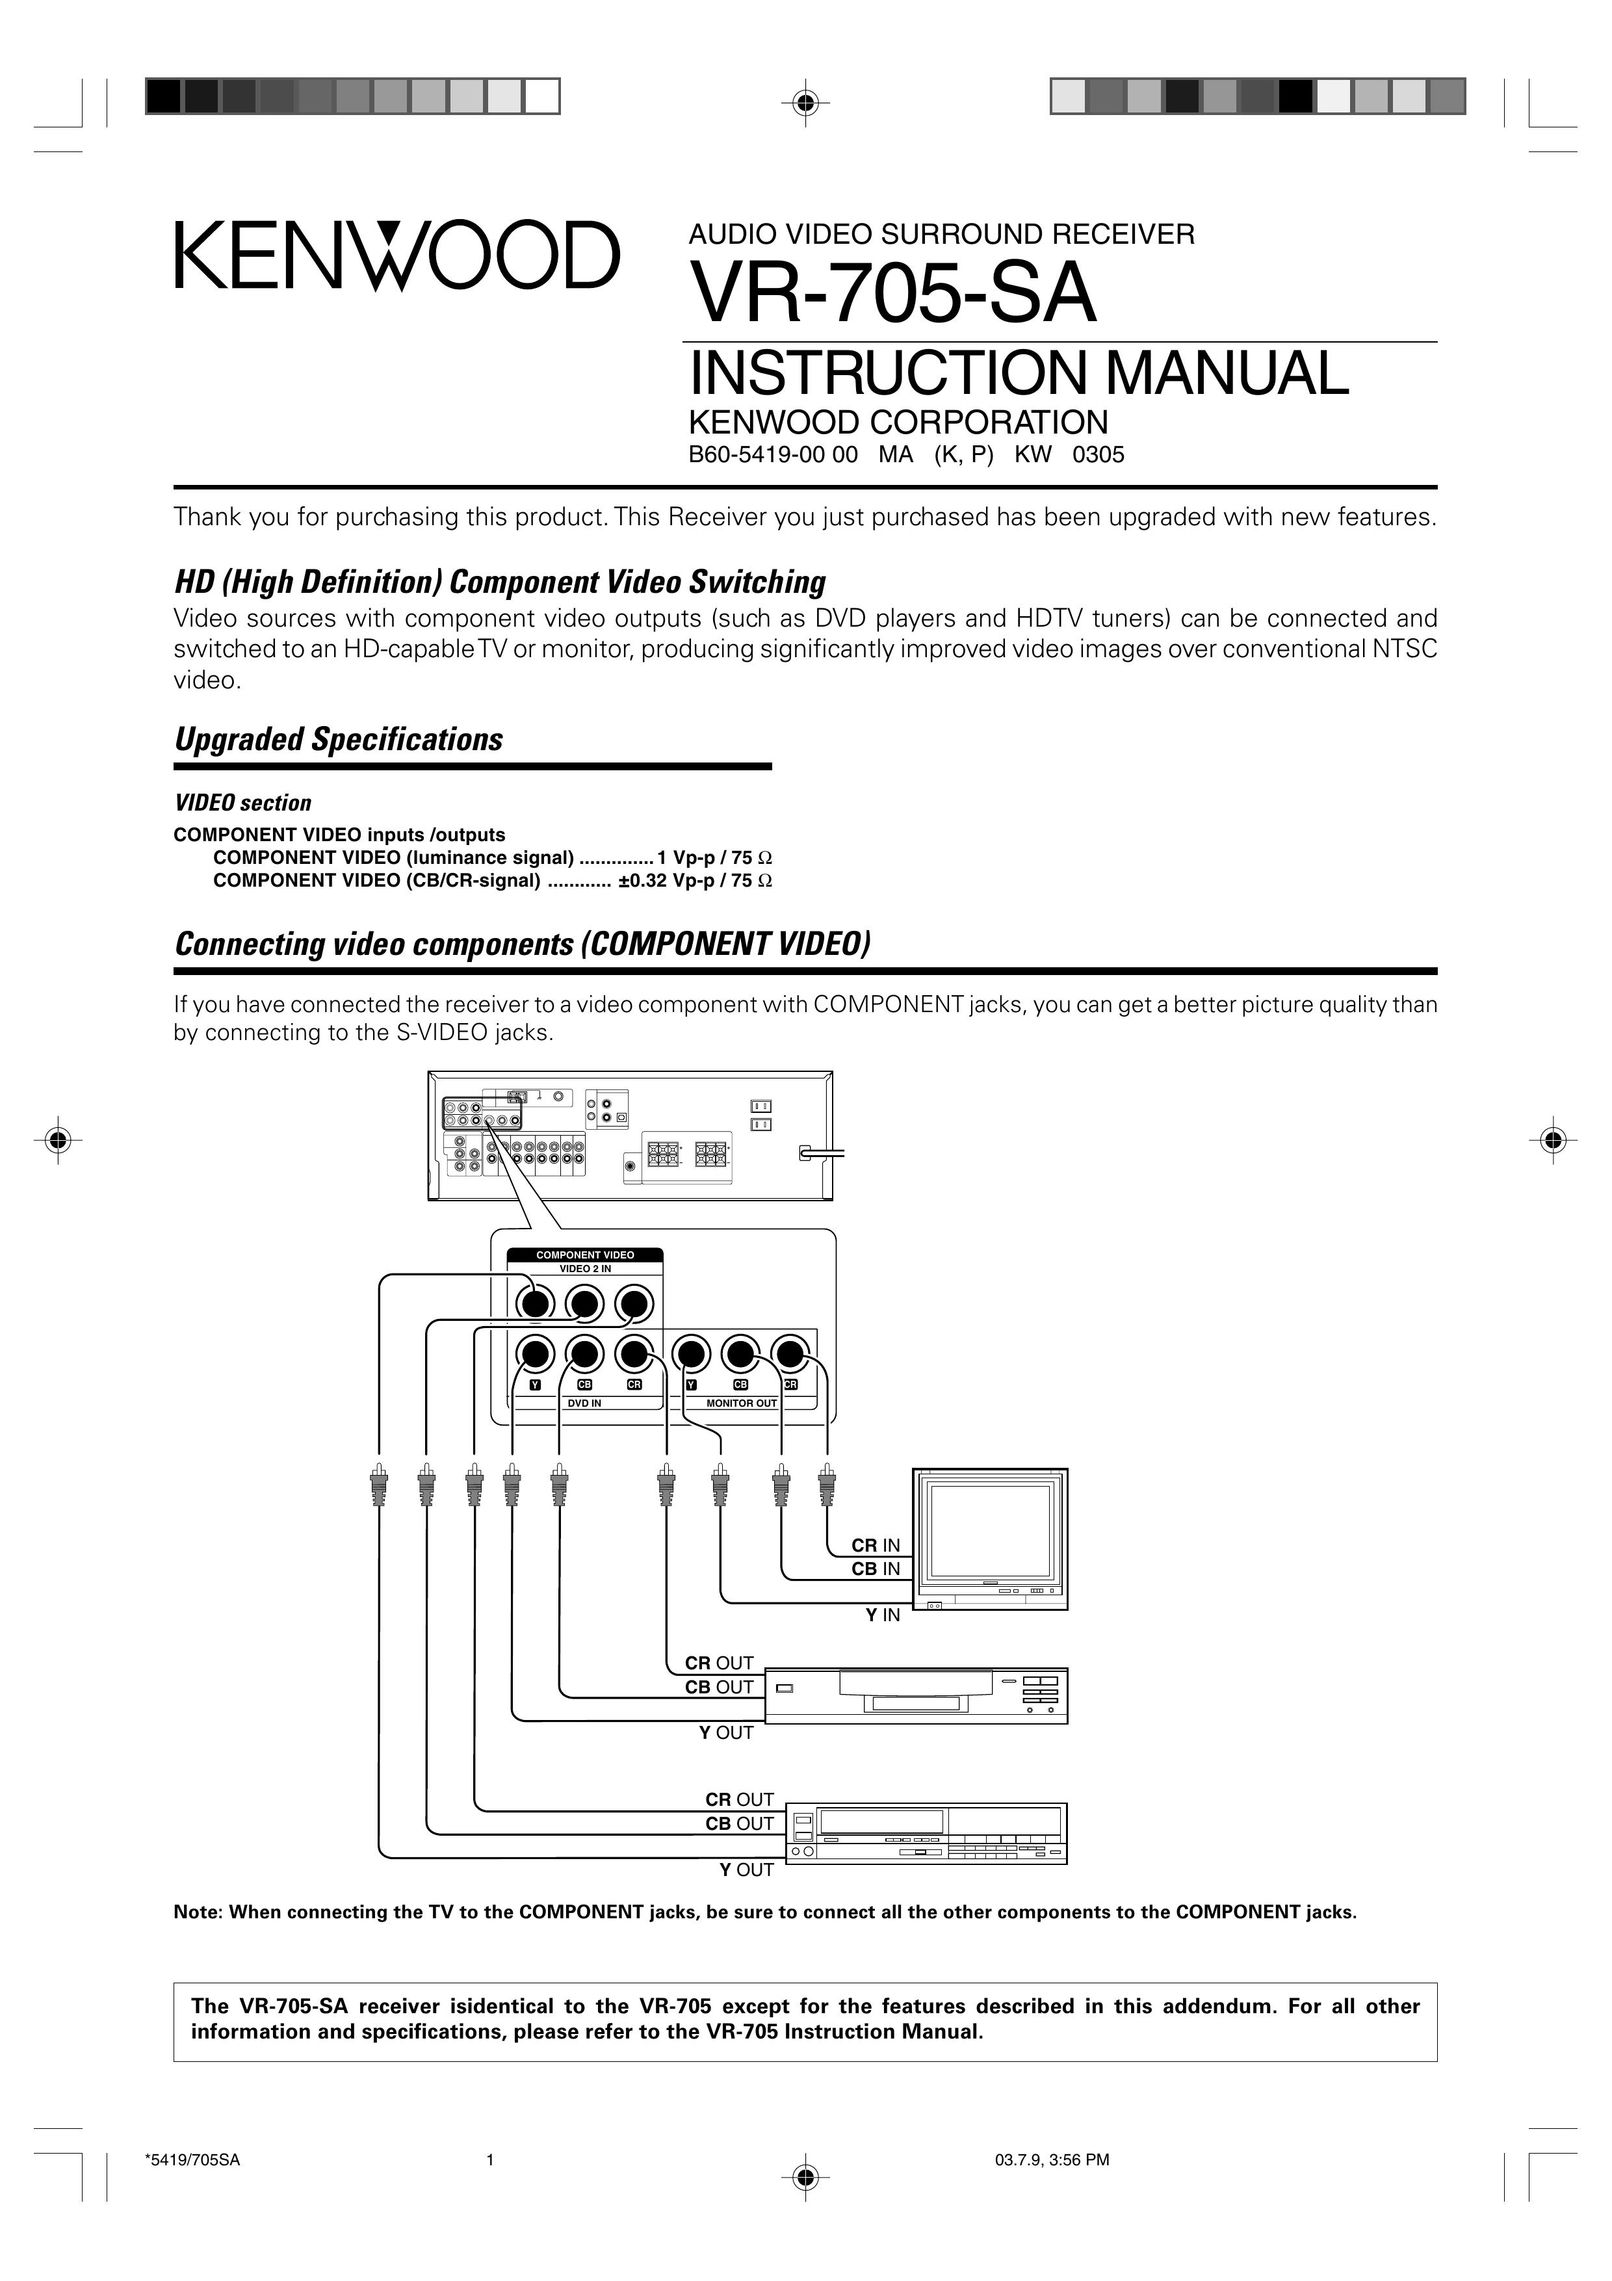 Kenwood Vr-705-SA Home Theater System User Manual